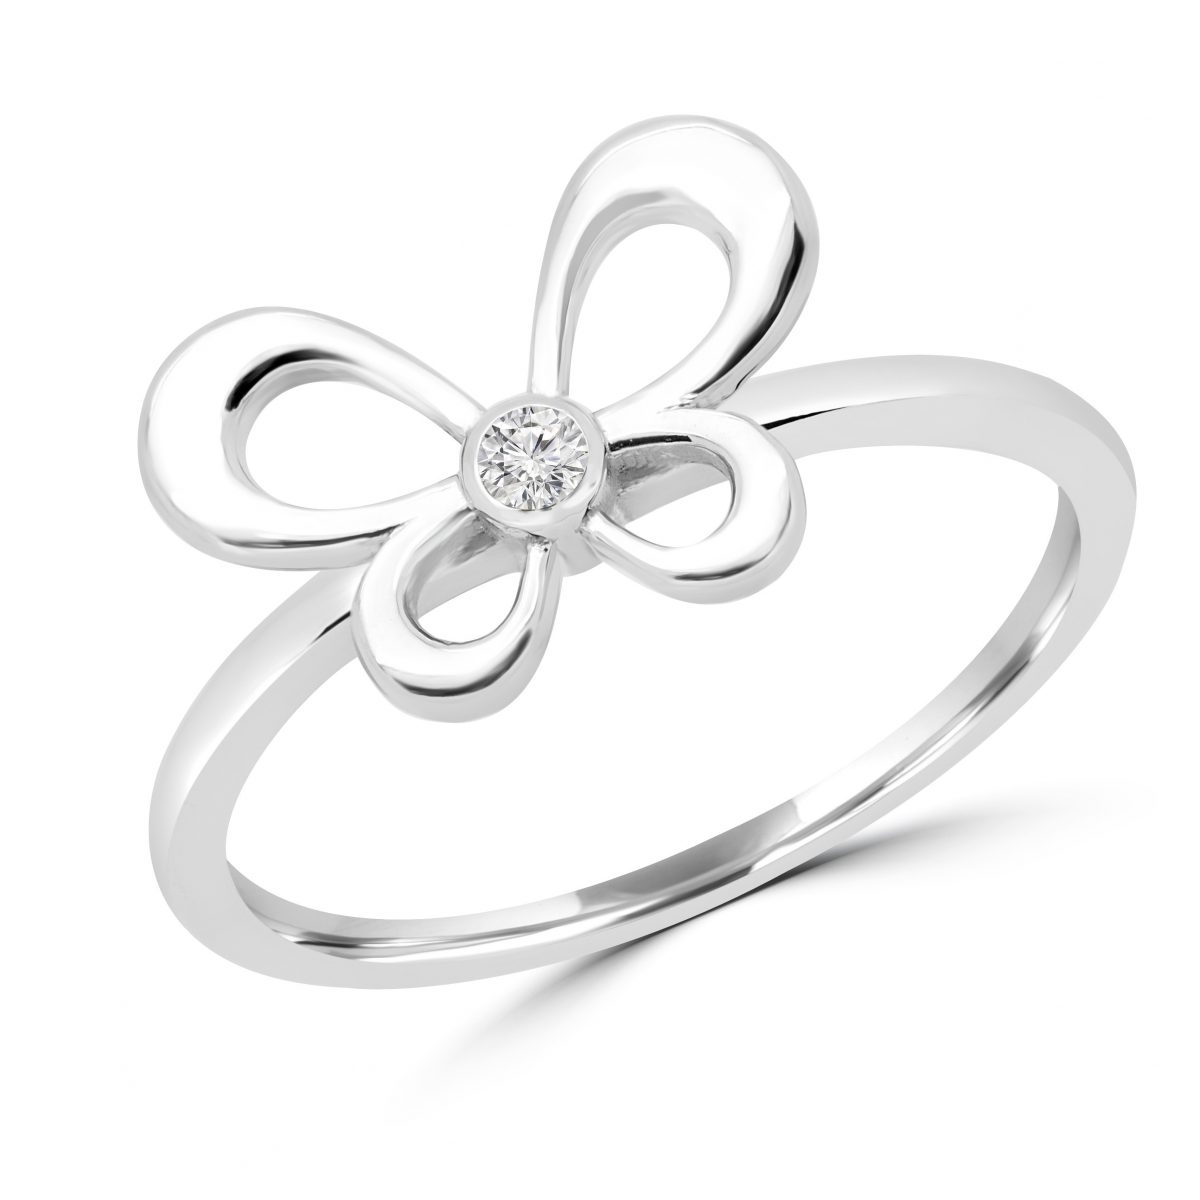 White gold 10k promise ring butterfly design with round diamond